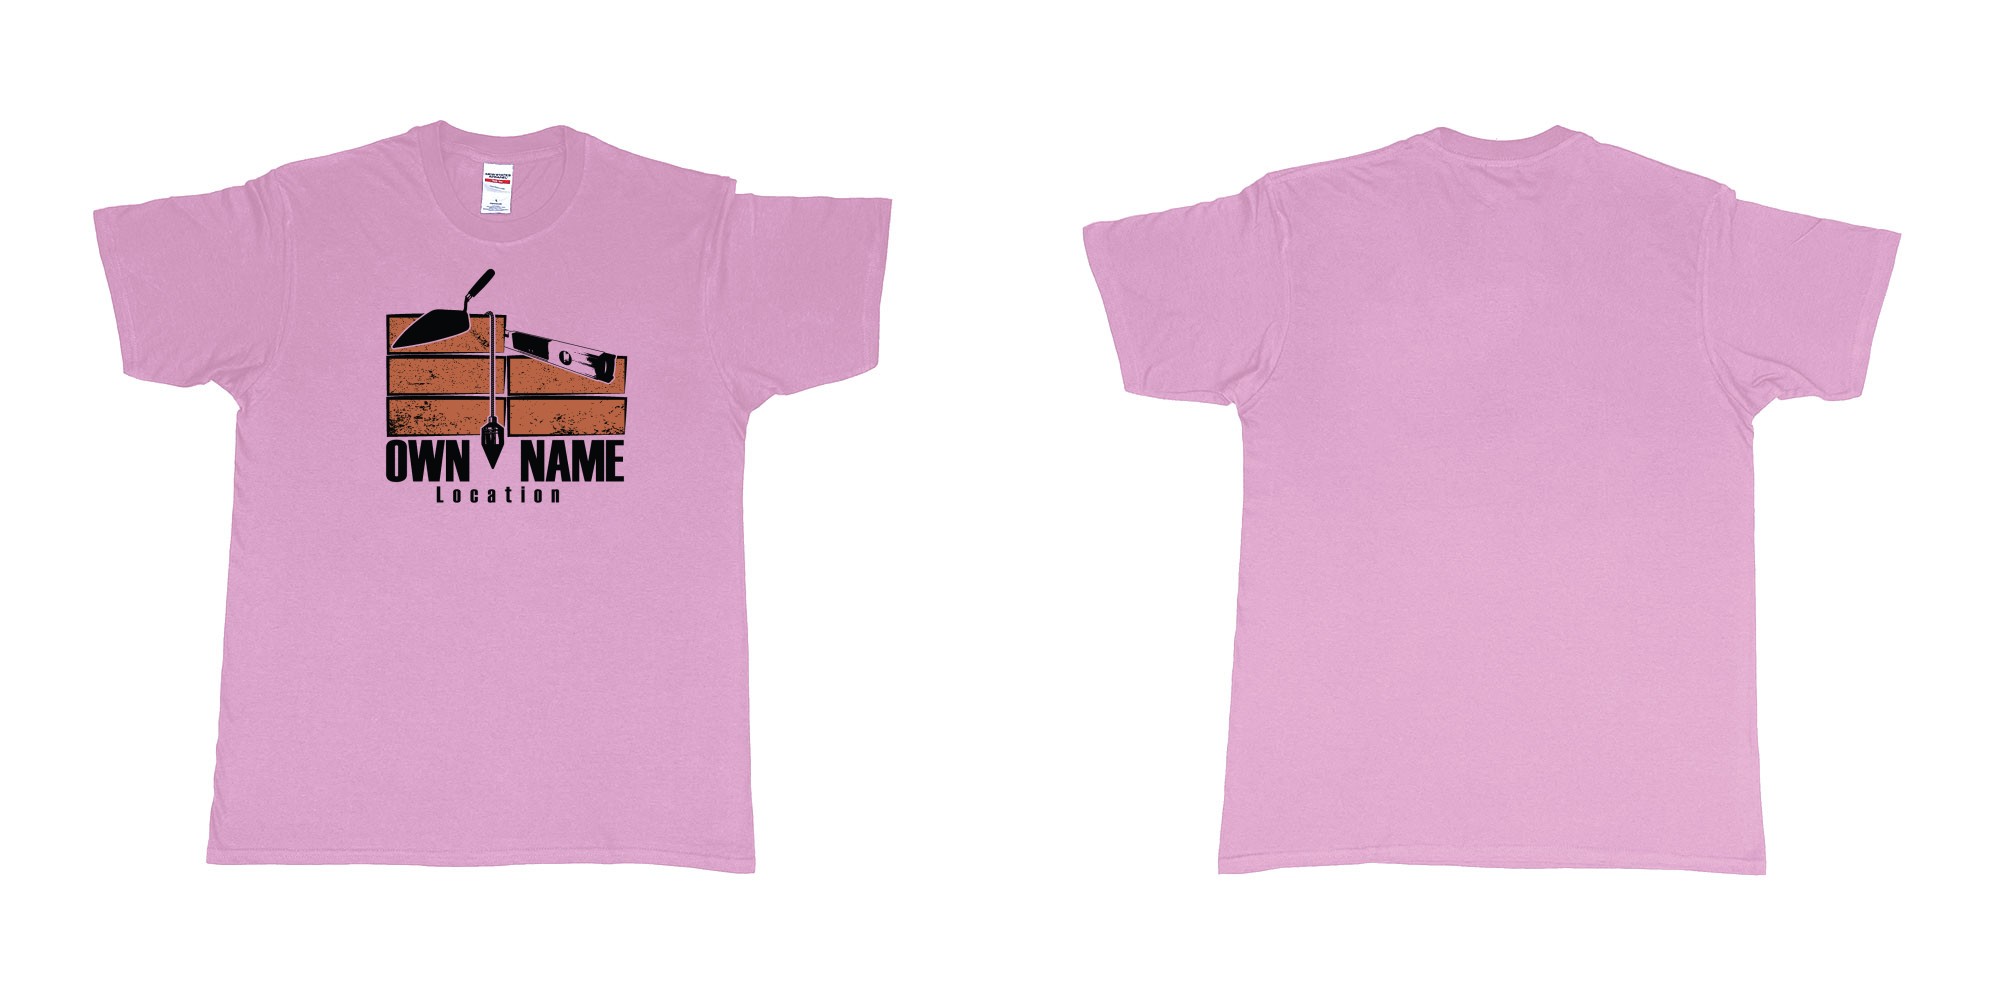 Custom tshirt design brick layer builder own custom company printing name location trowel in fabric color light-pink choice your own text made in Bali by The Pirate Way